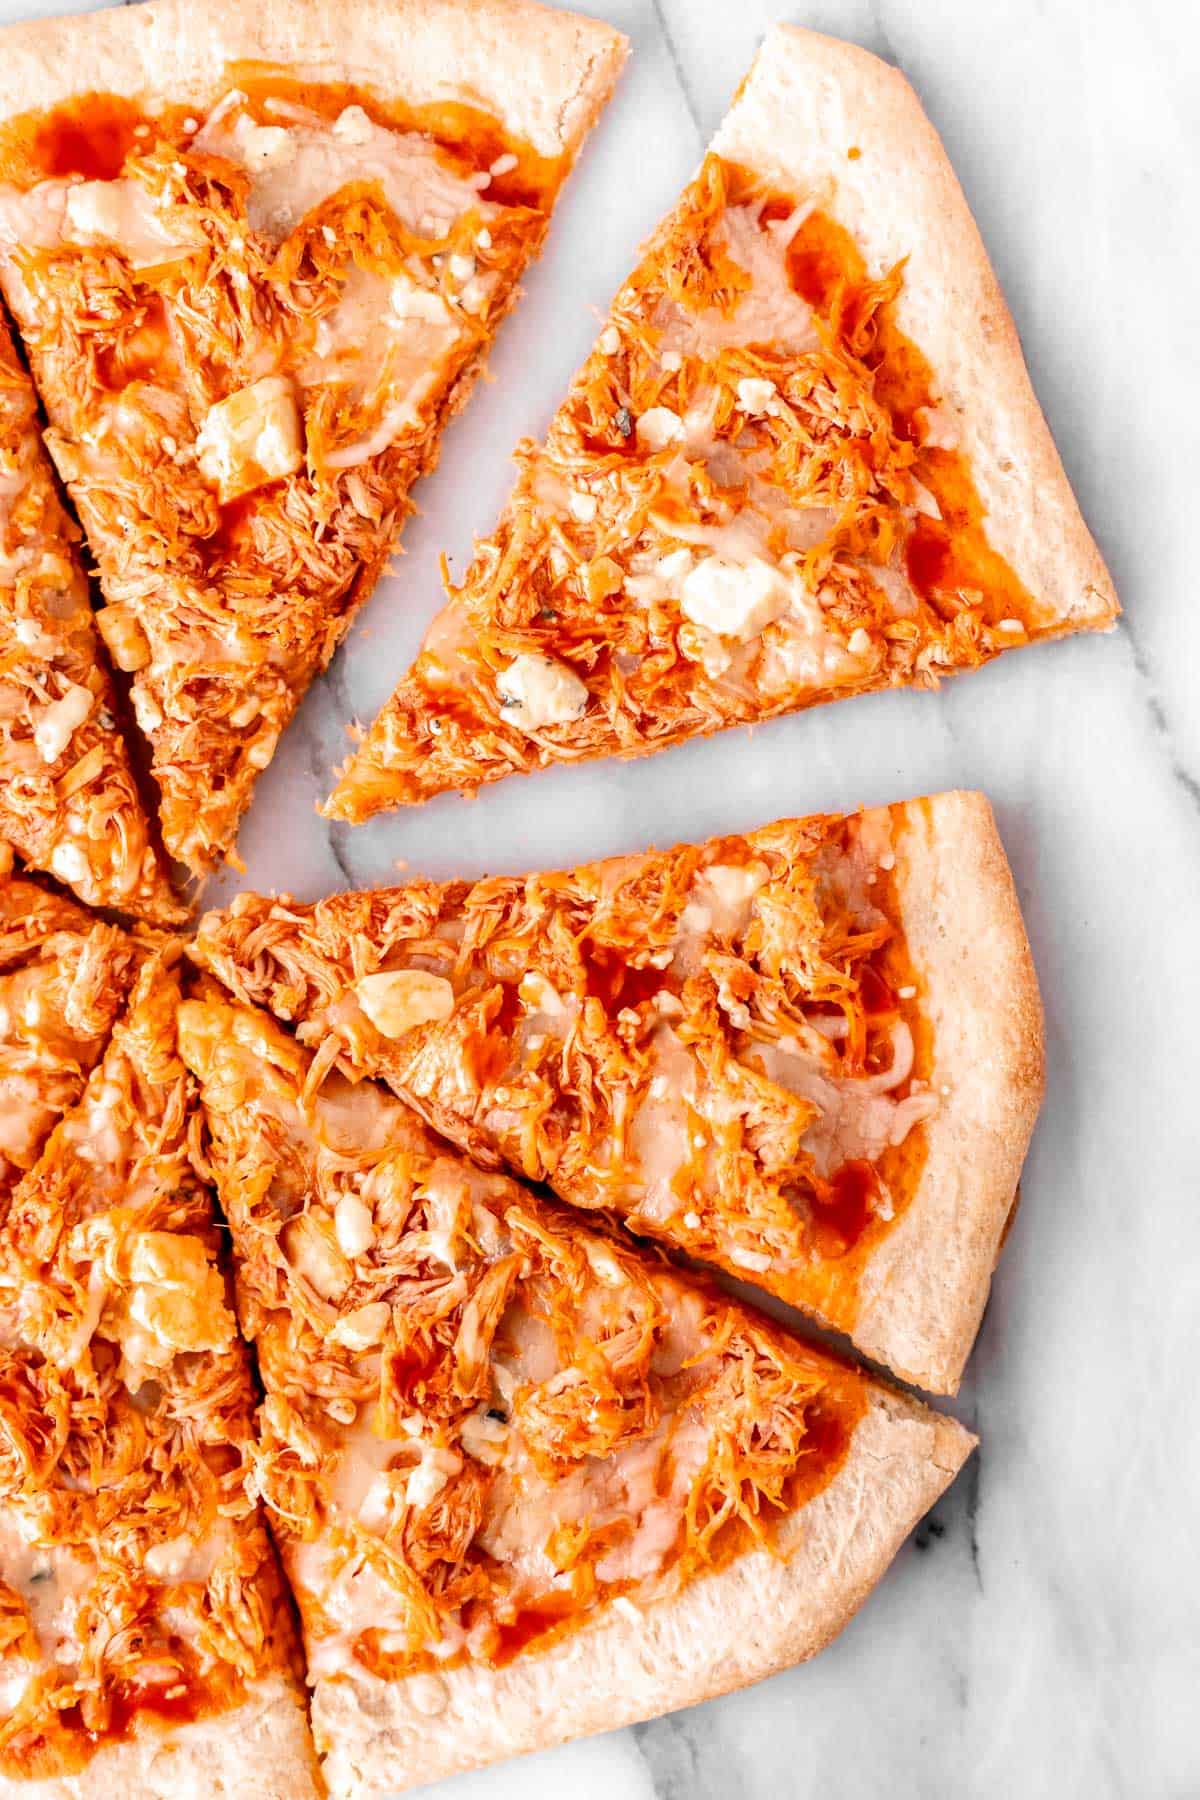 Overhead view of a buffalo chicken pizza cut into 8 slices on a white background.